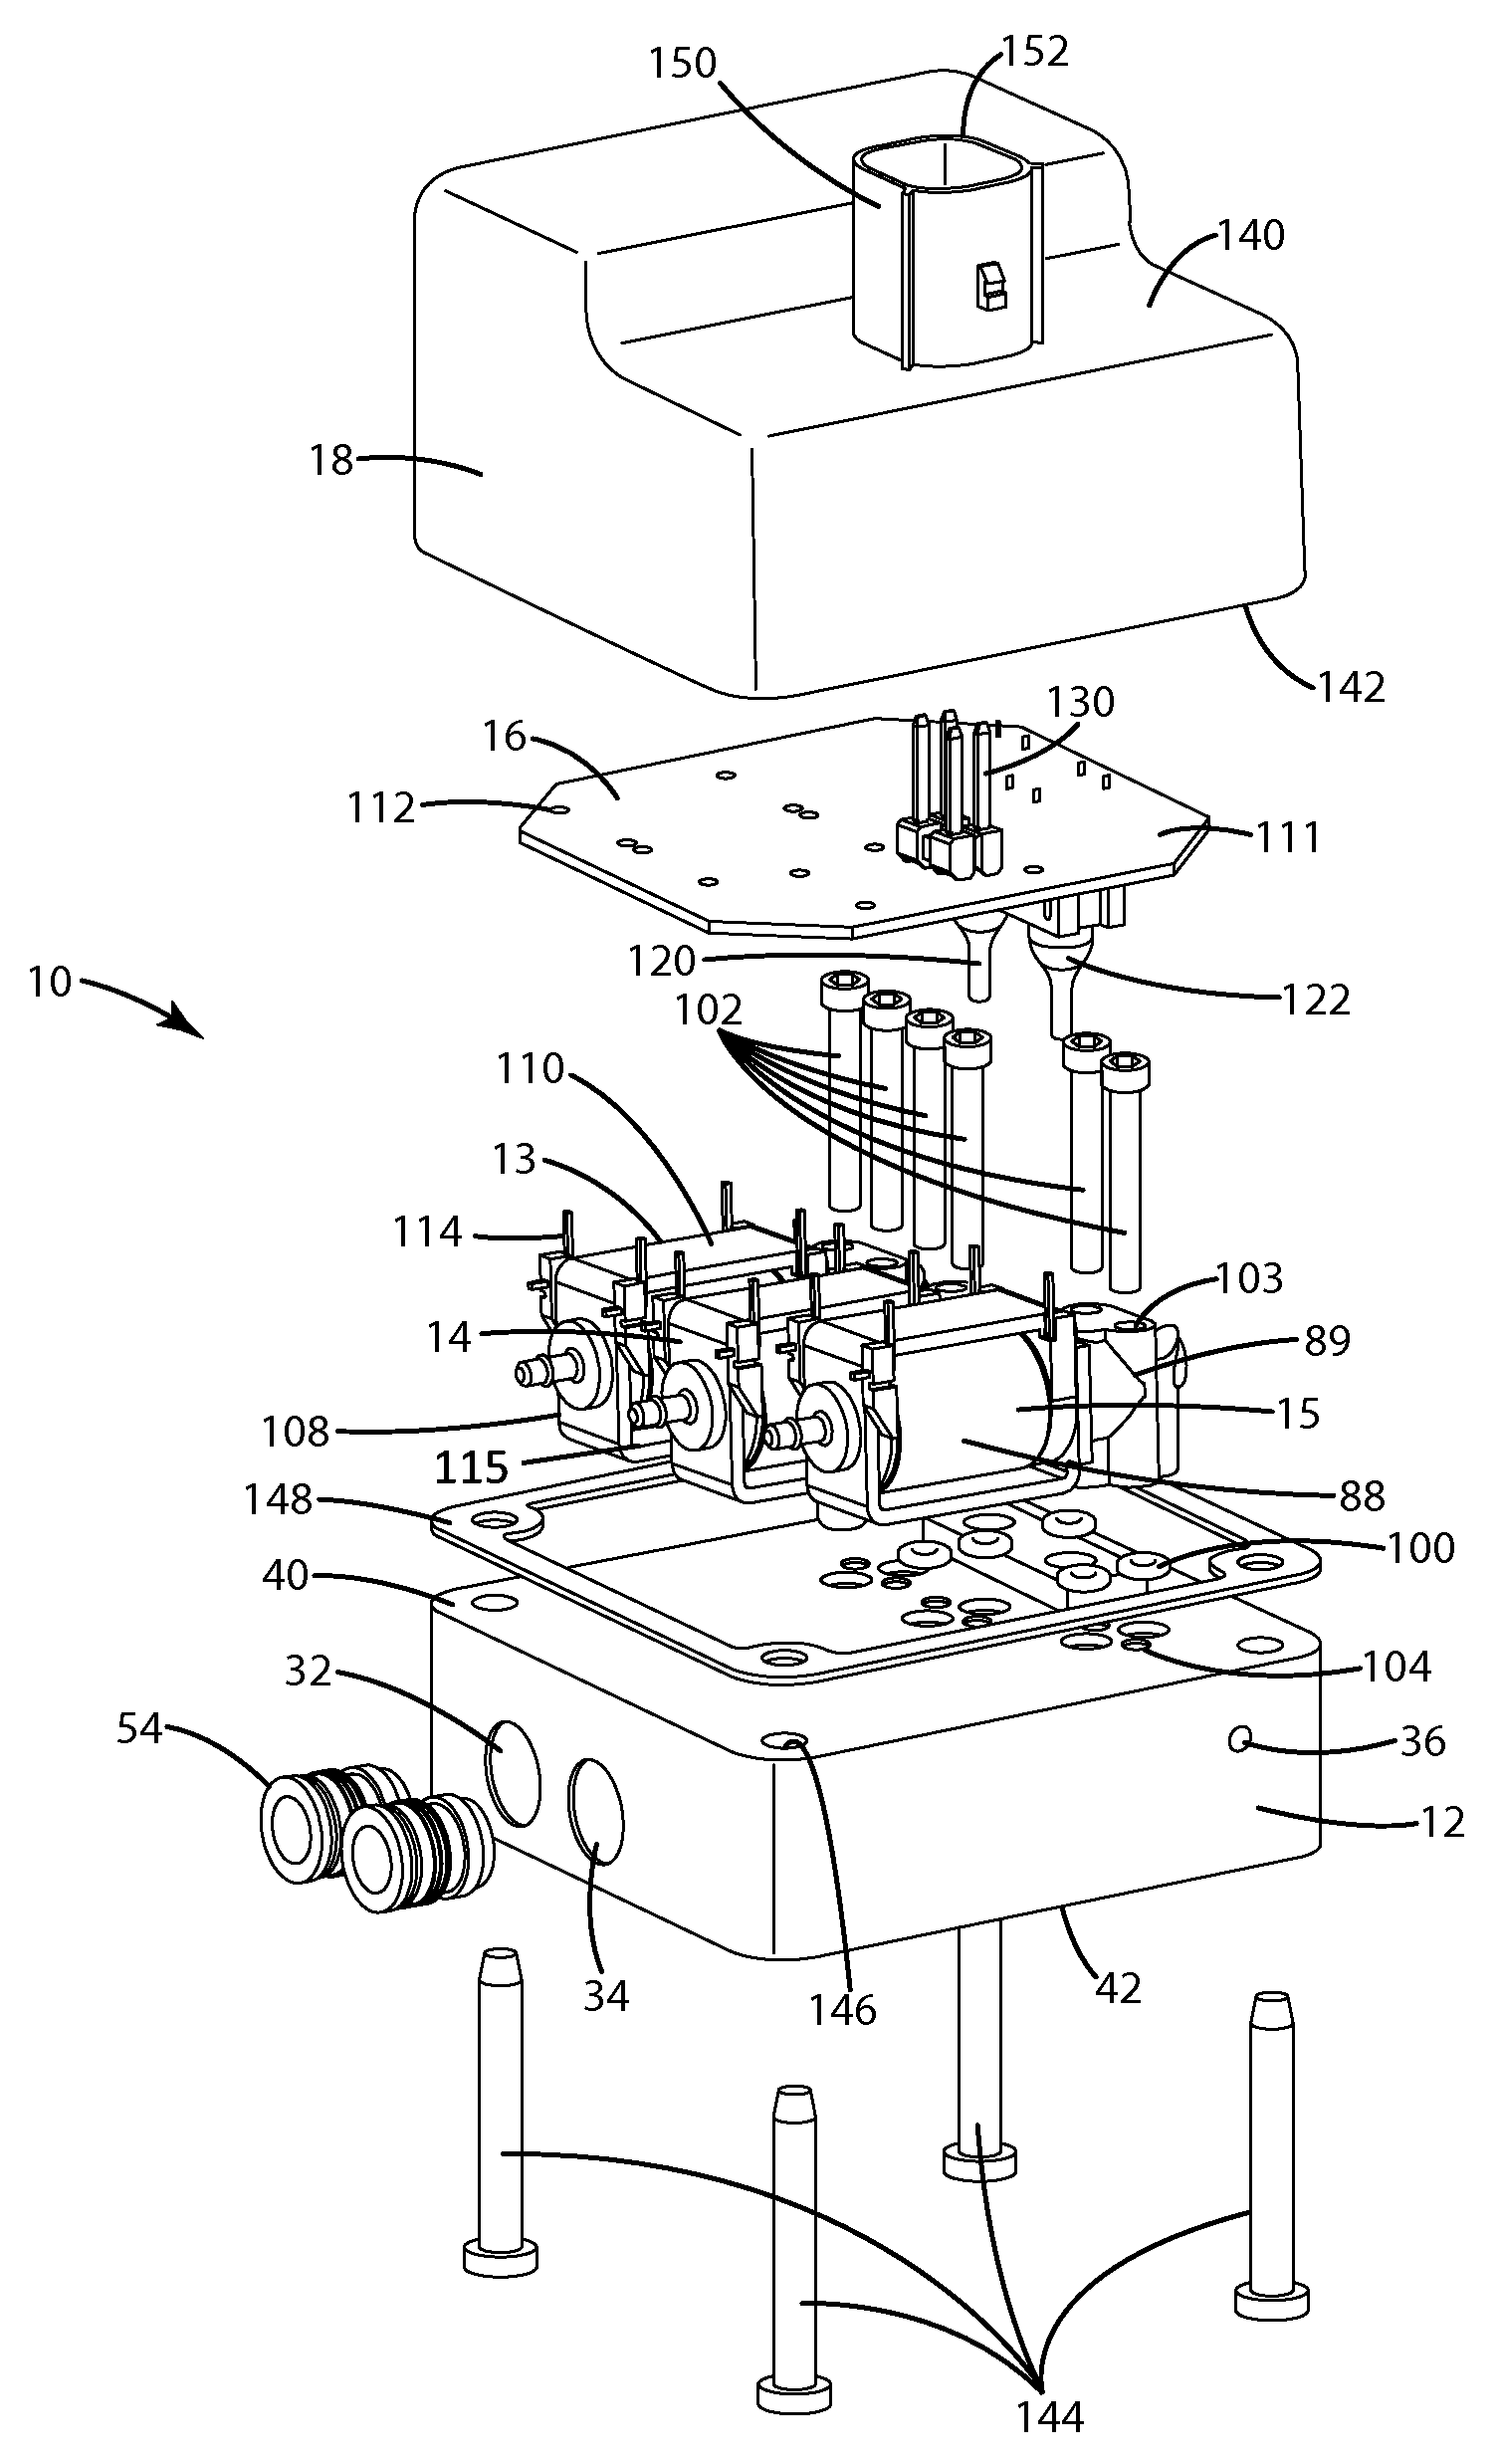 Integrated manifold system for controlling an air suspension